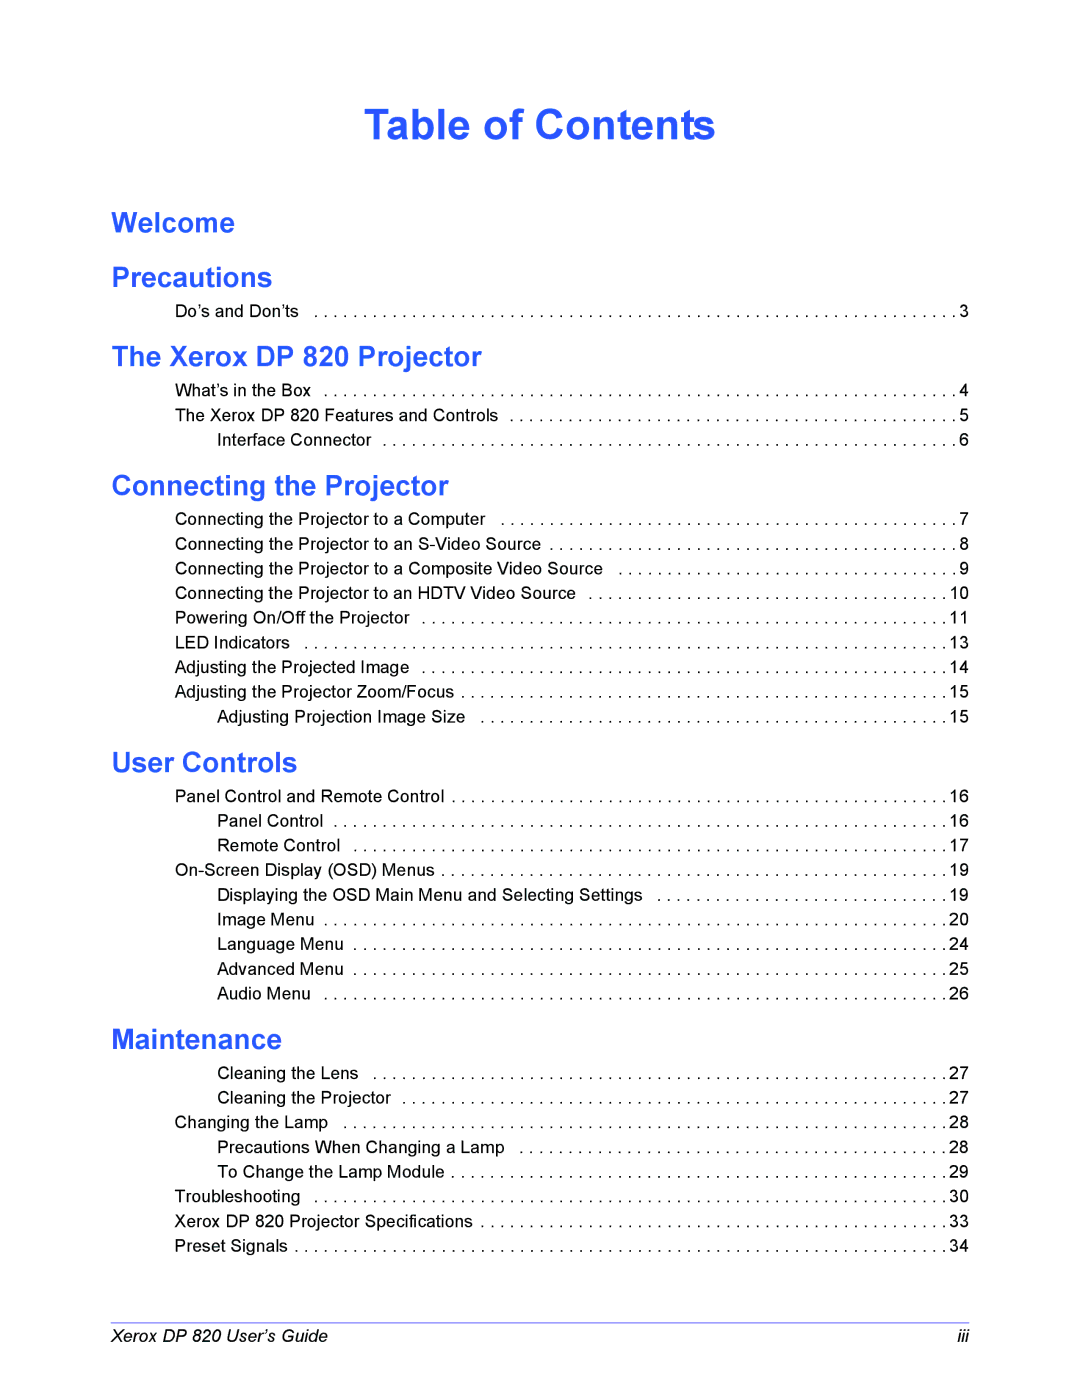 Xerox DP 820 manual Table of Contents 